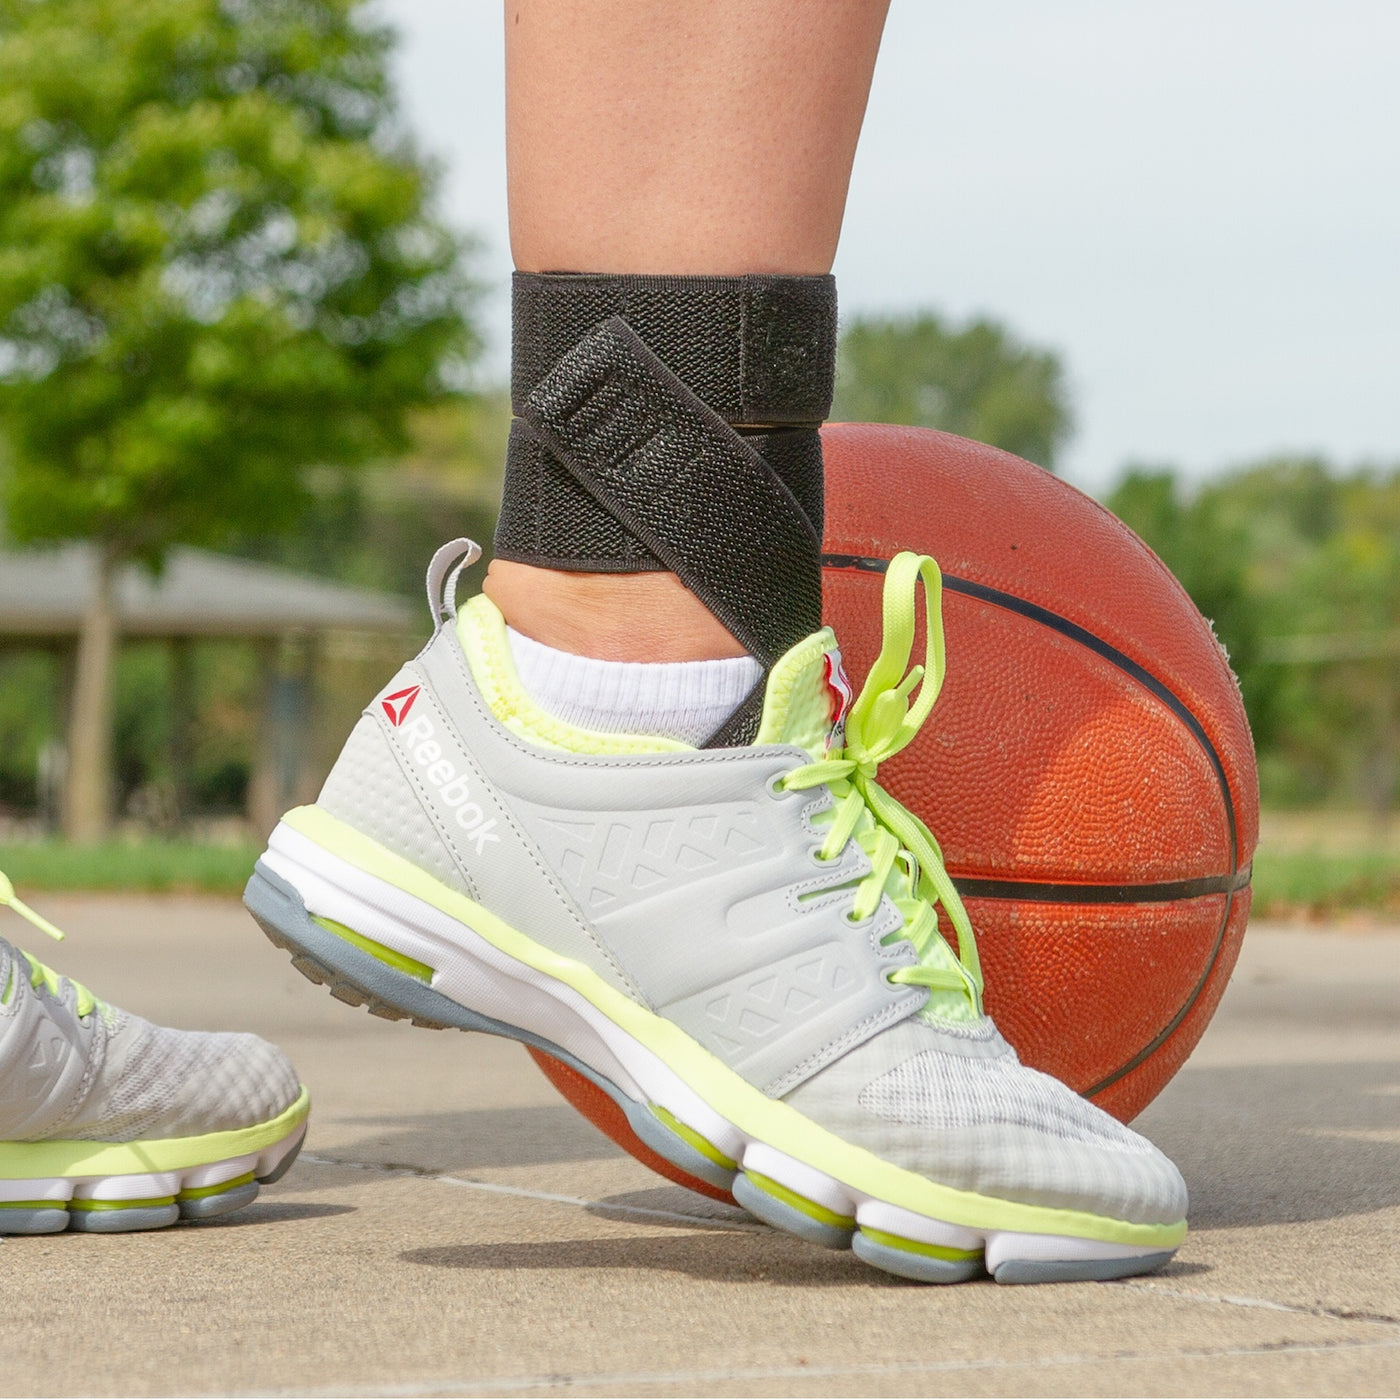 Wear our daytime ankle brace wrap for sports to relieve heel and plantar fasciitis pain